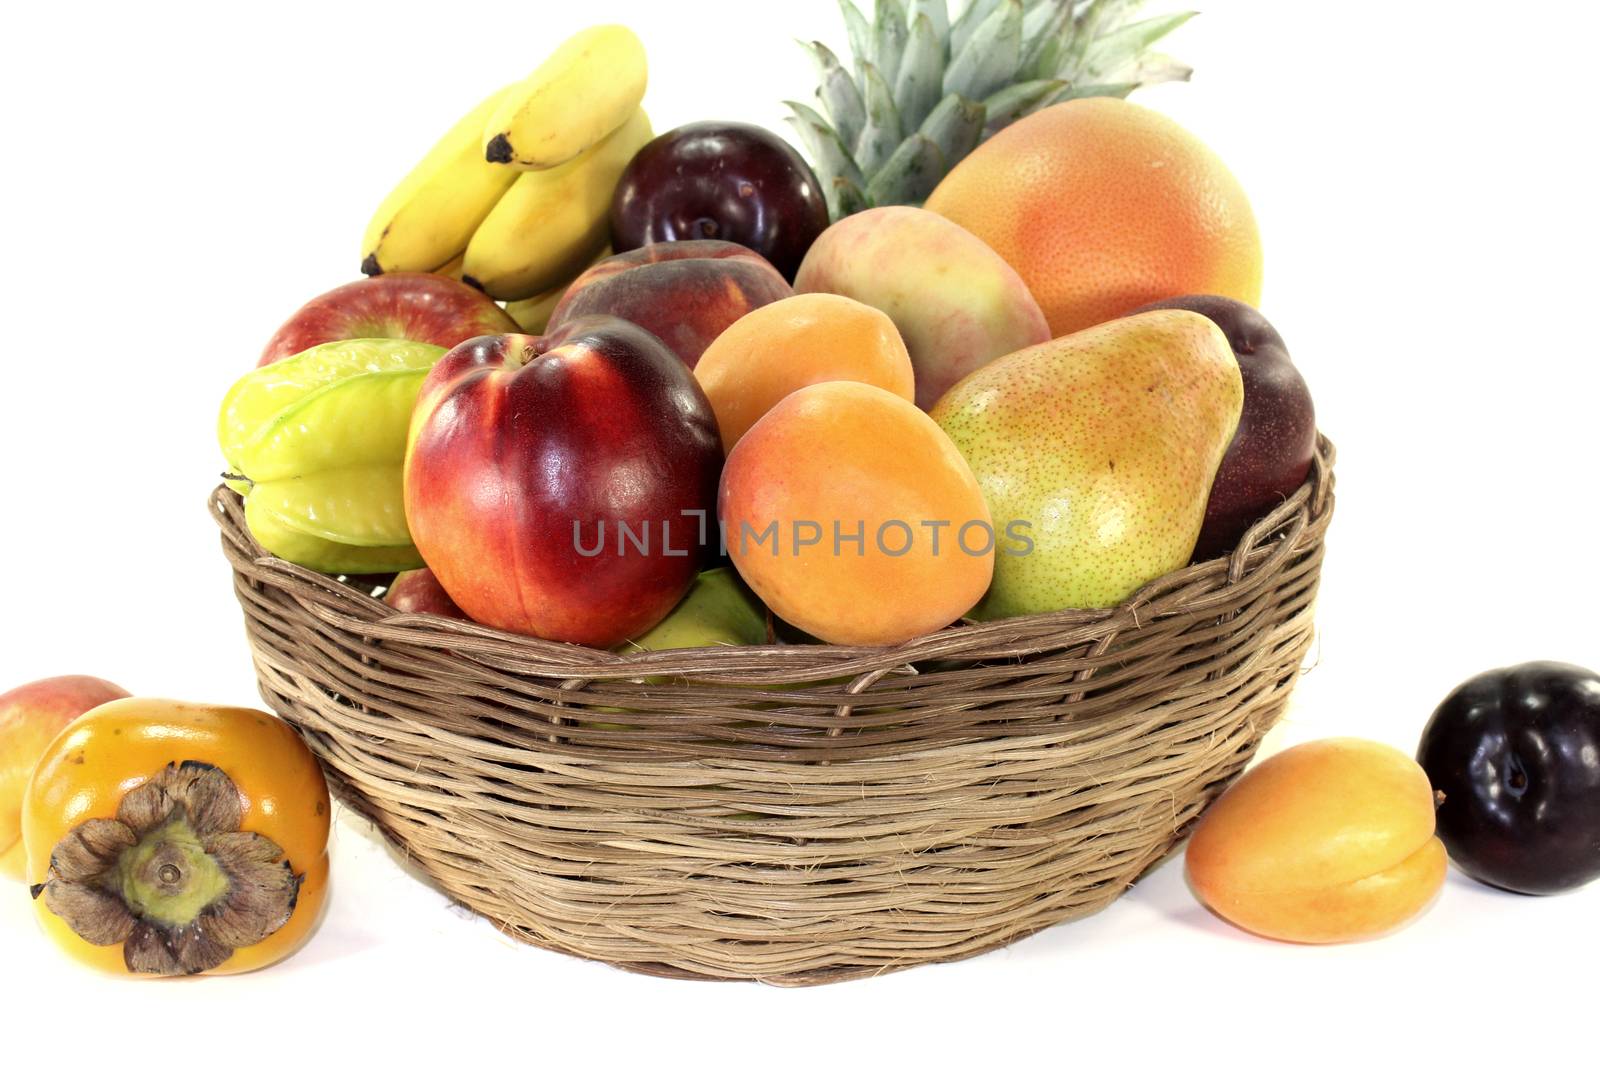 Fruit basket with various colorful fruits on a light background